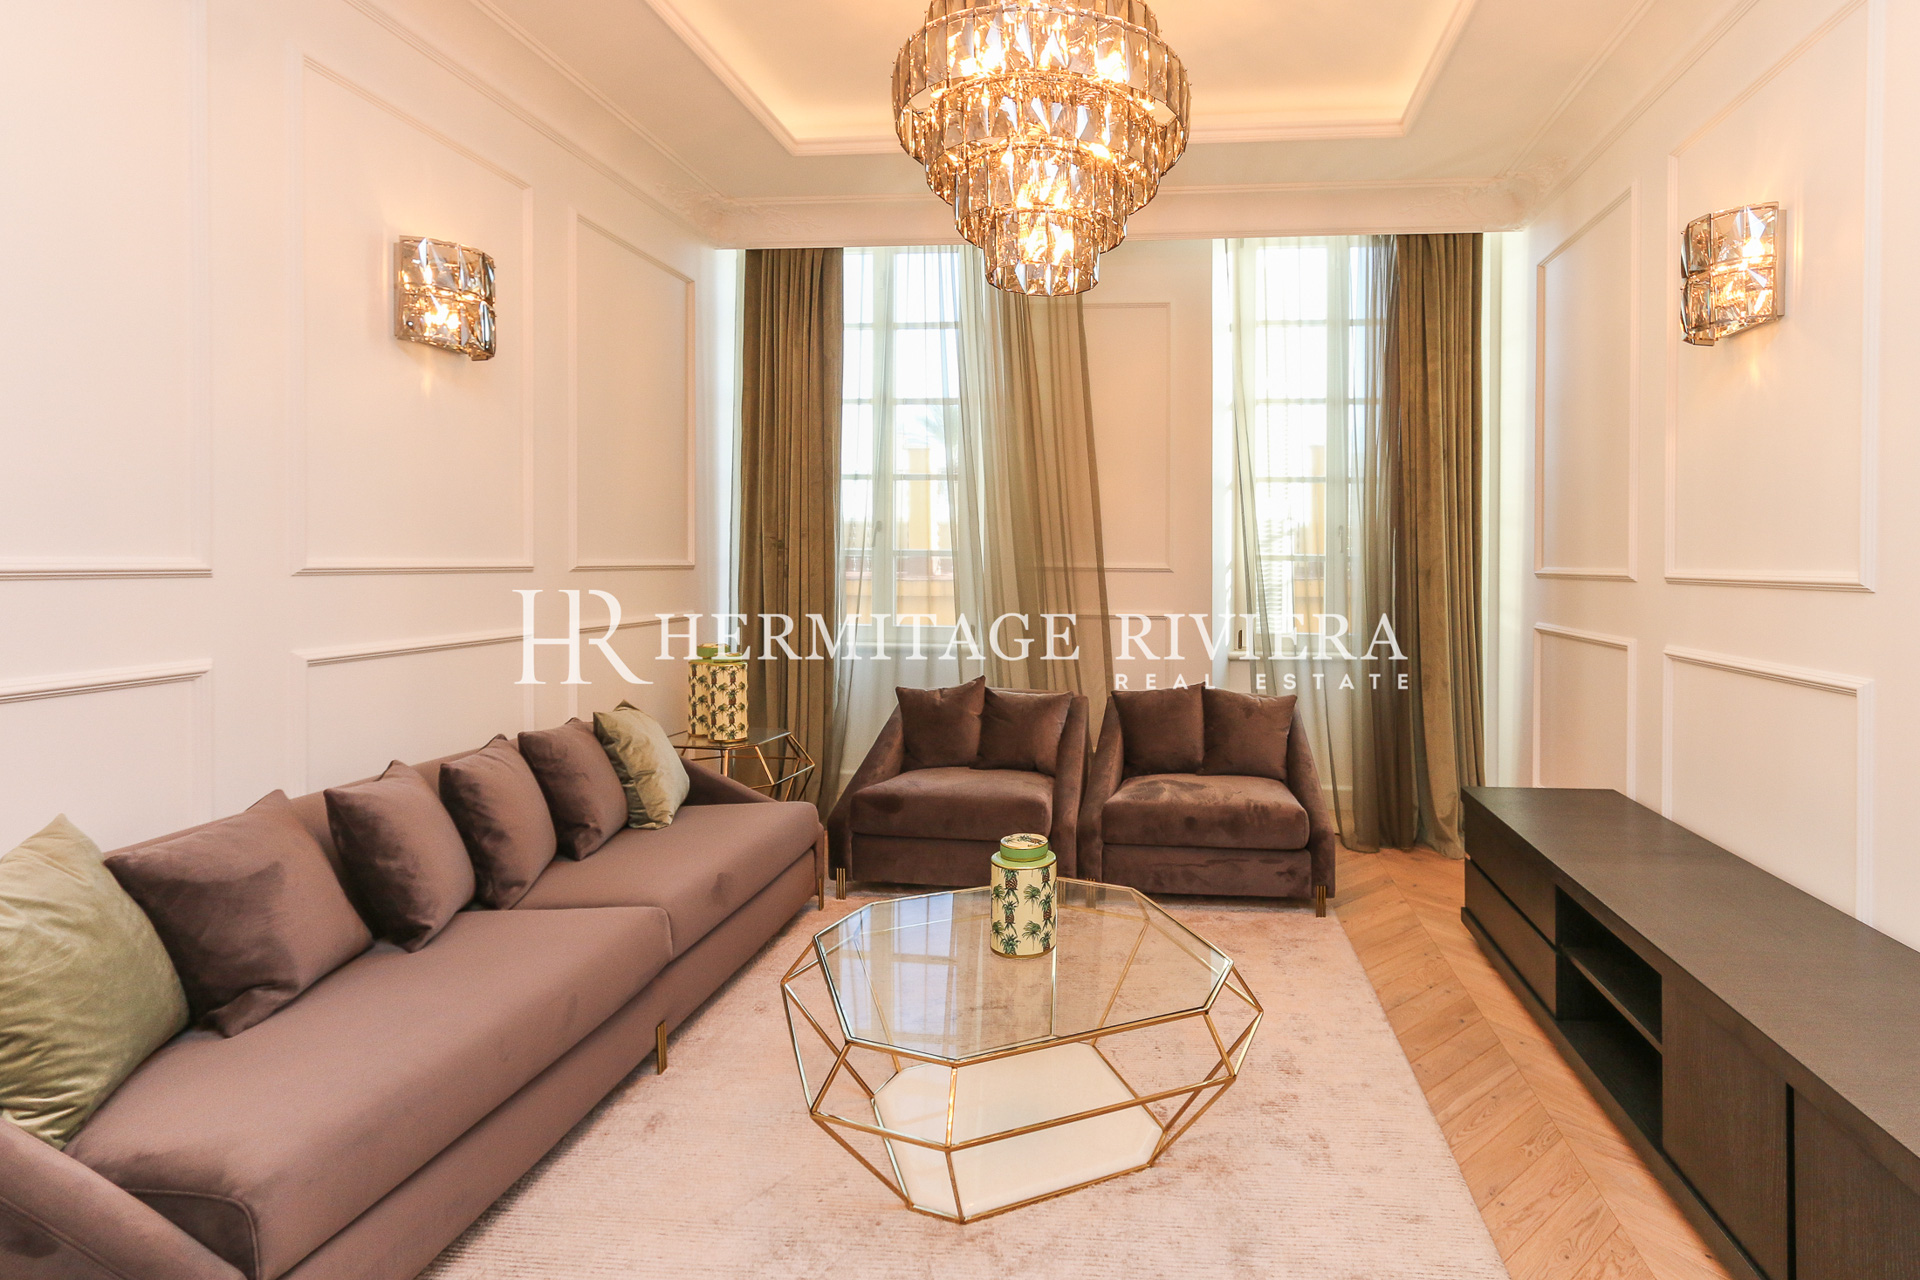 Sumptuous apartment in an exceptional location (image 5)